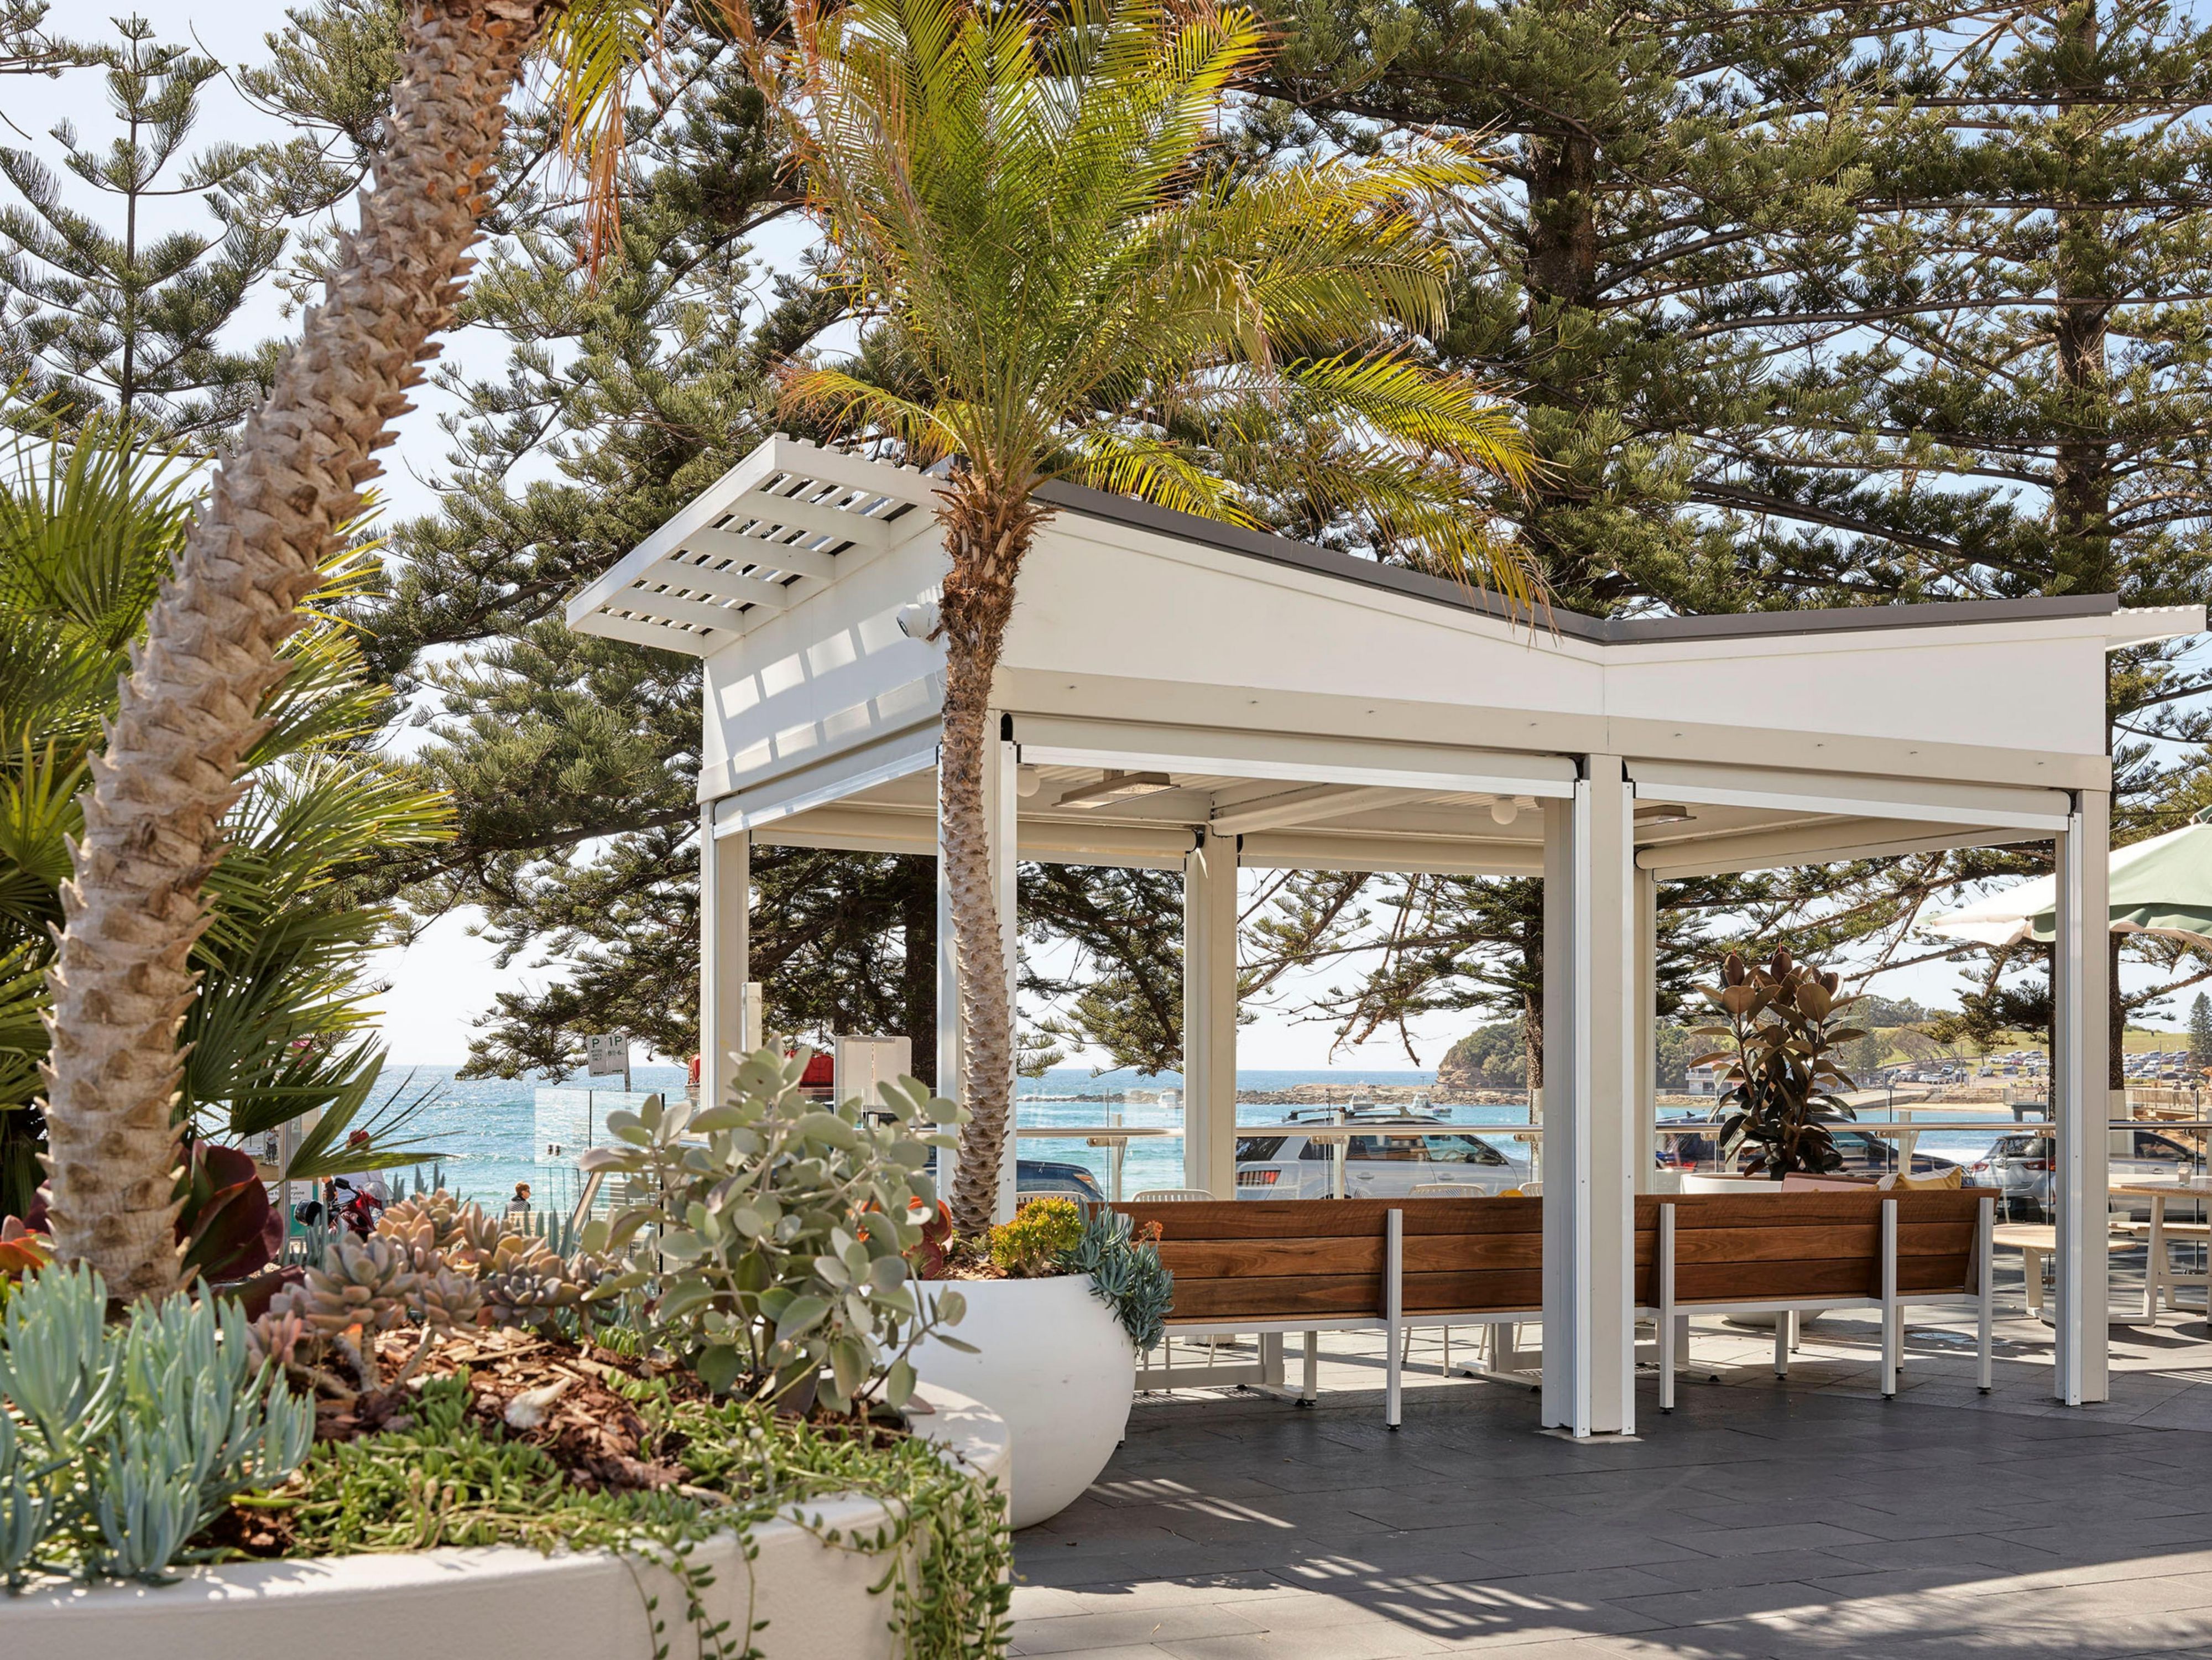 Located in the heart of Terrigal, Terrigal Beach House is a vibrant meeting place for endless good times with stunning beach views and fresh ocean breezes. Enjoy icy cold drinks on the beach terrace or indulge your taste buds with our locally sourced seasonal menu.